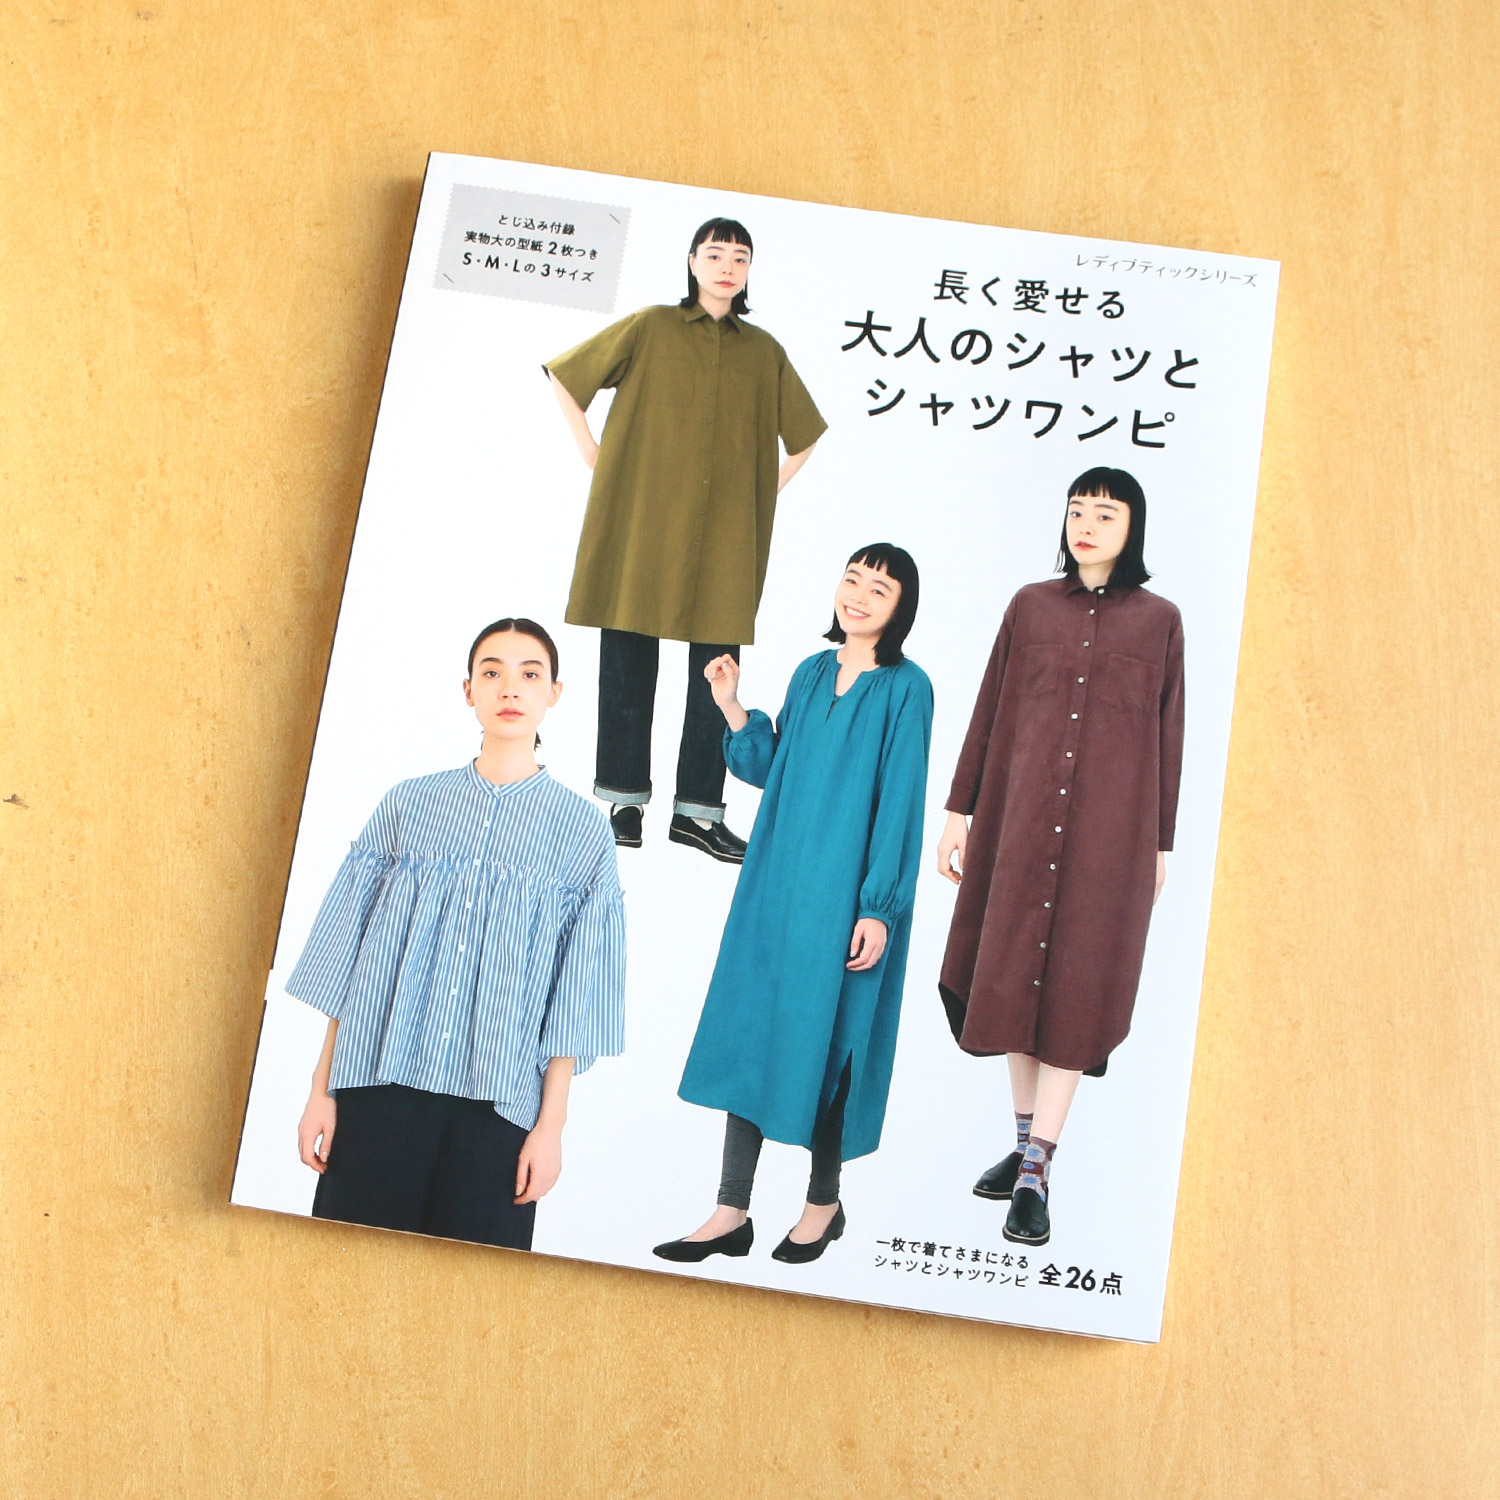 S8480 Adult shirts and shirt dresses that can be loved for a long time(book)